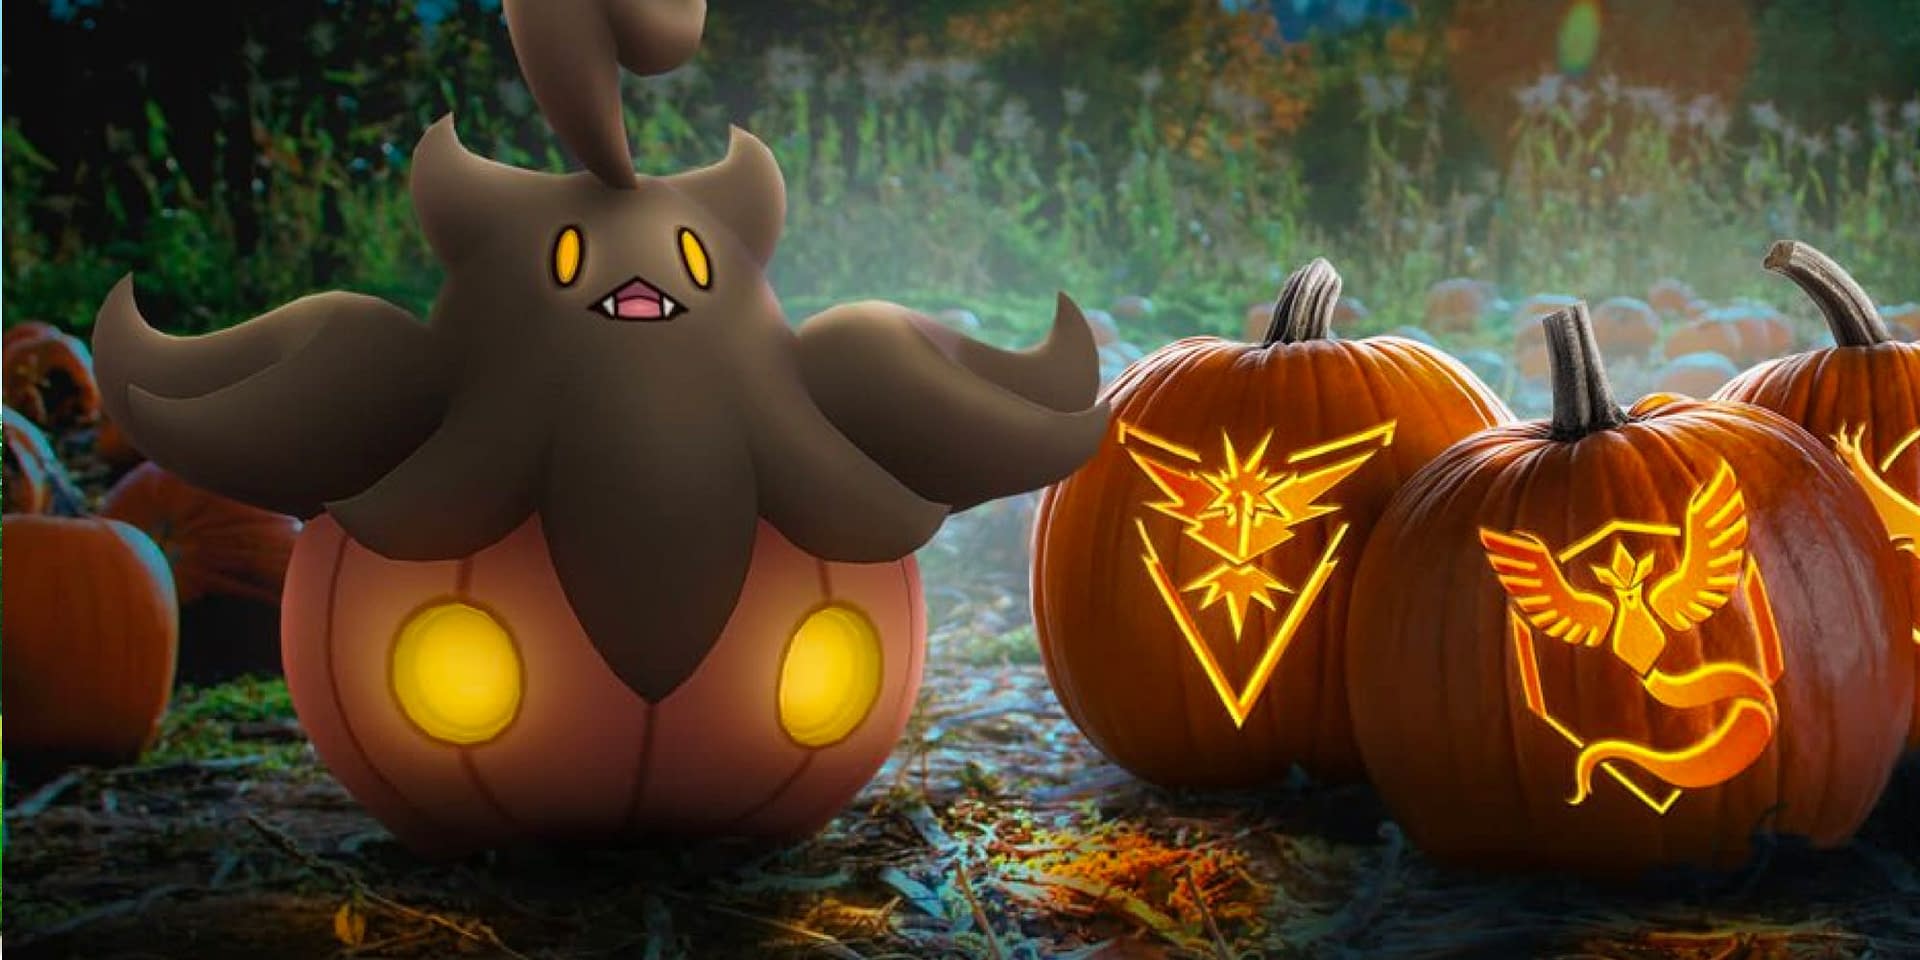 Pokemon GO Gets a Sweet New Login Screen With the Halloween Update